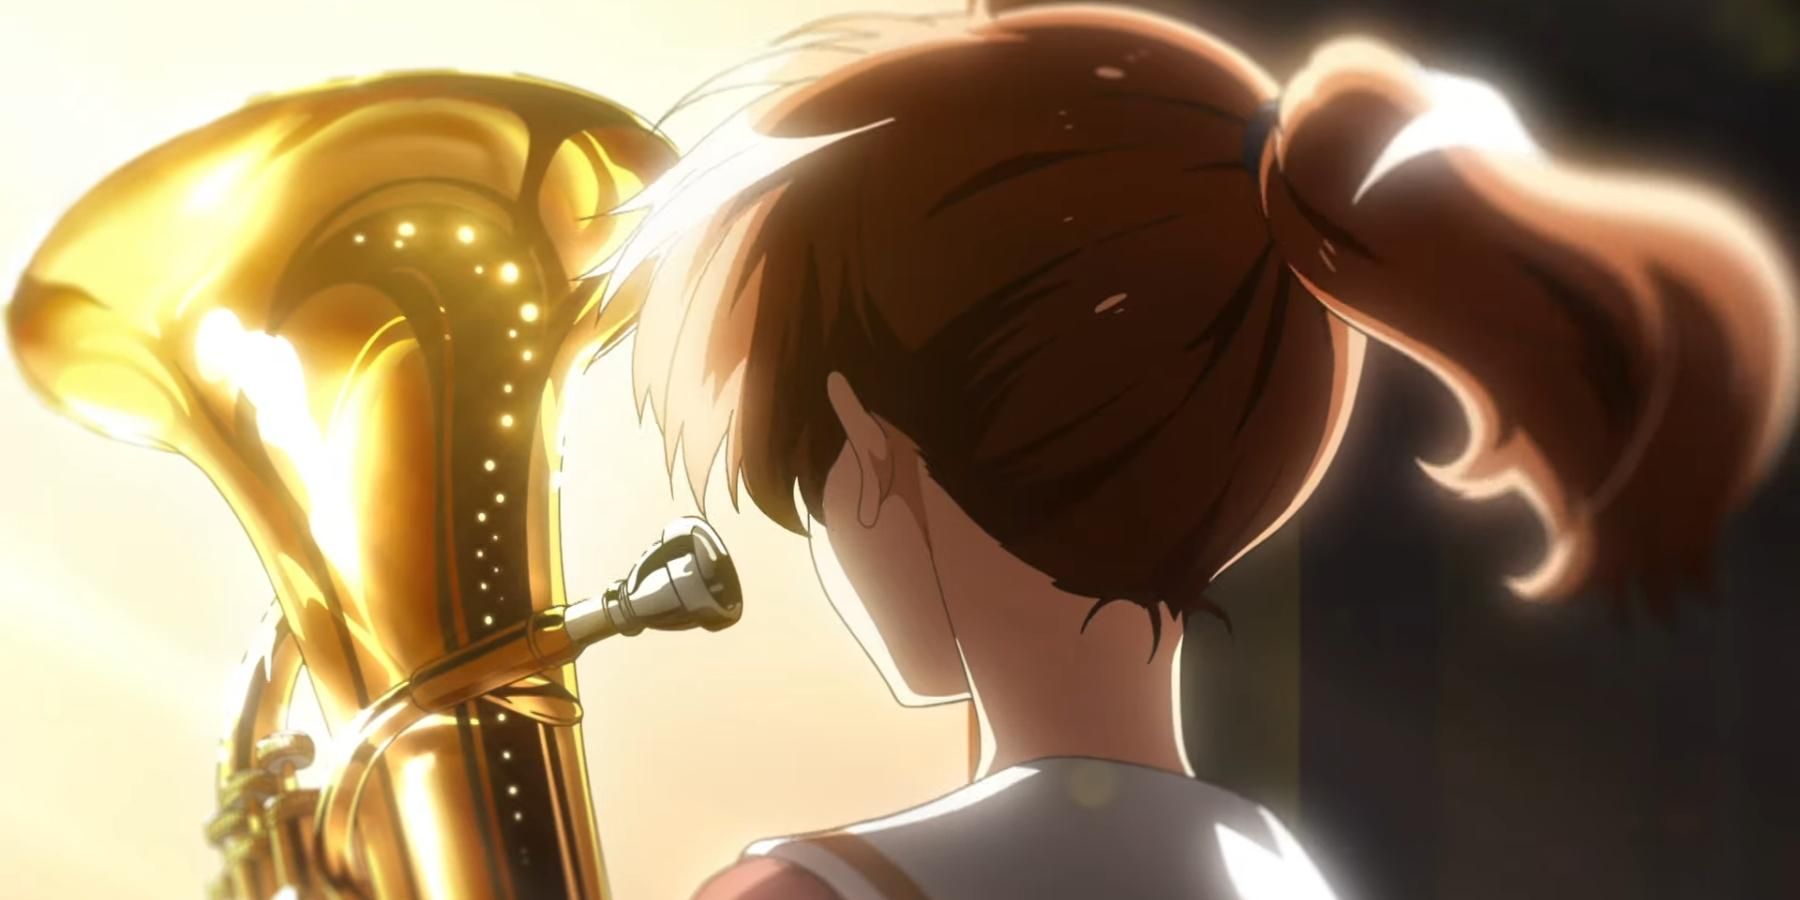 Sound! Euphonium: What to Expect From Season 3 (According to the